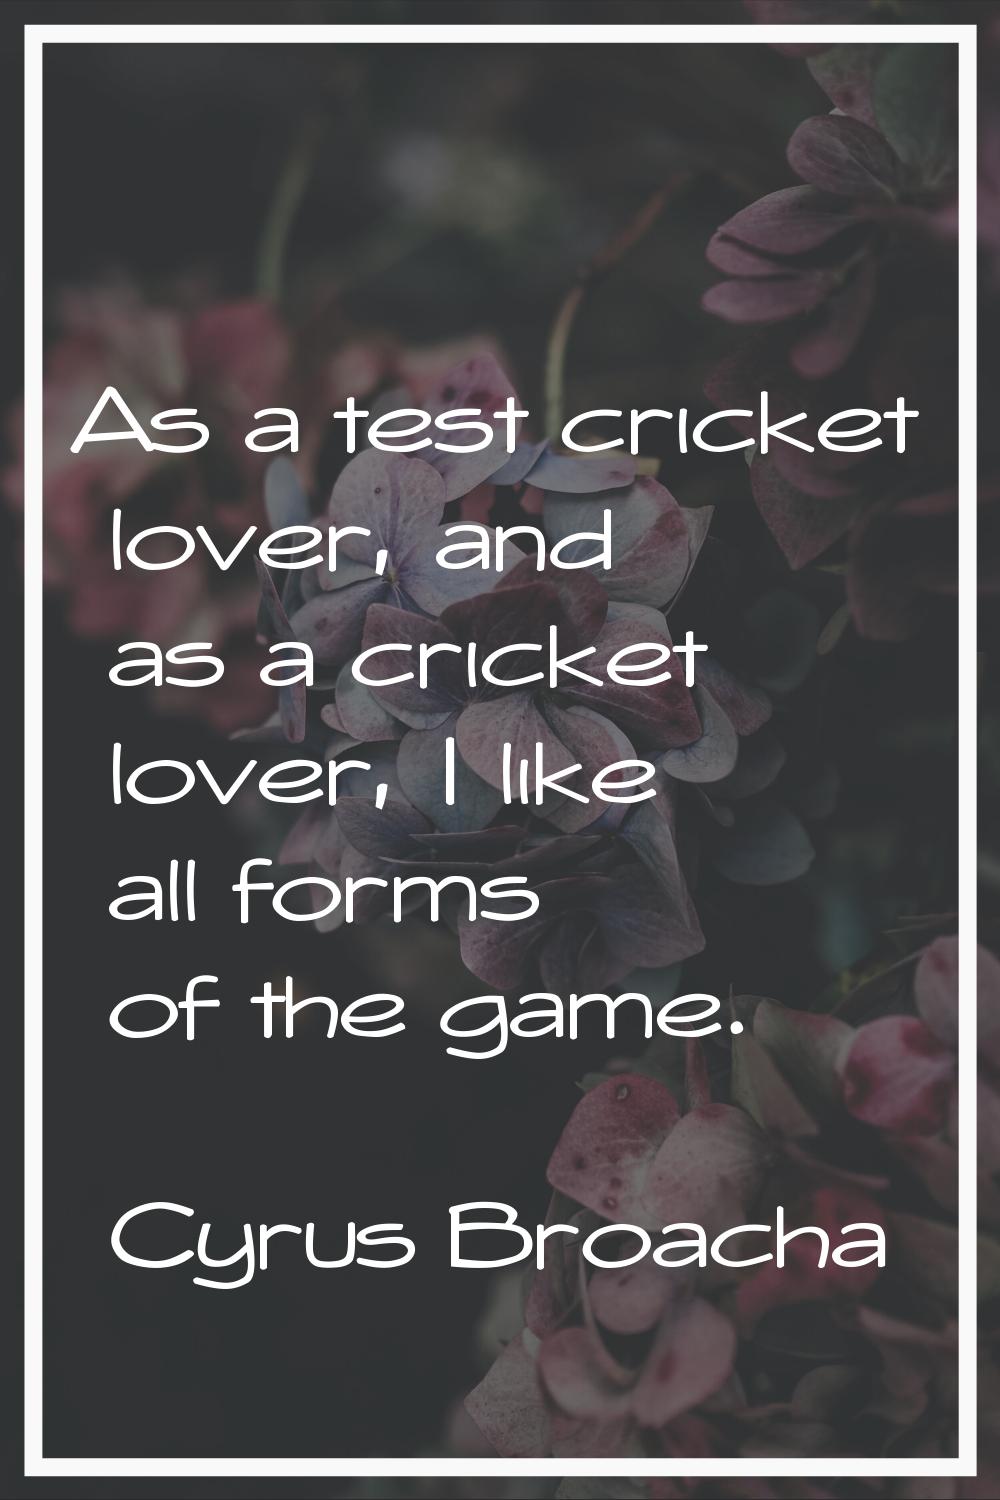 As a test cricket lover, and as a cricket lover, I like all forms of the game.